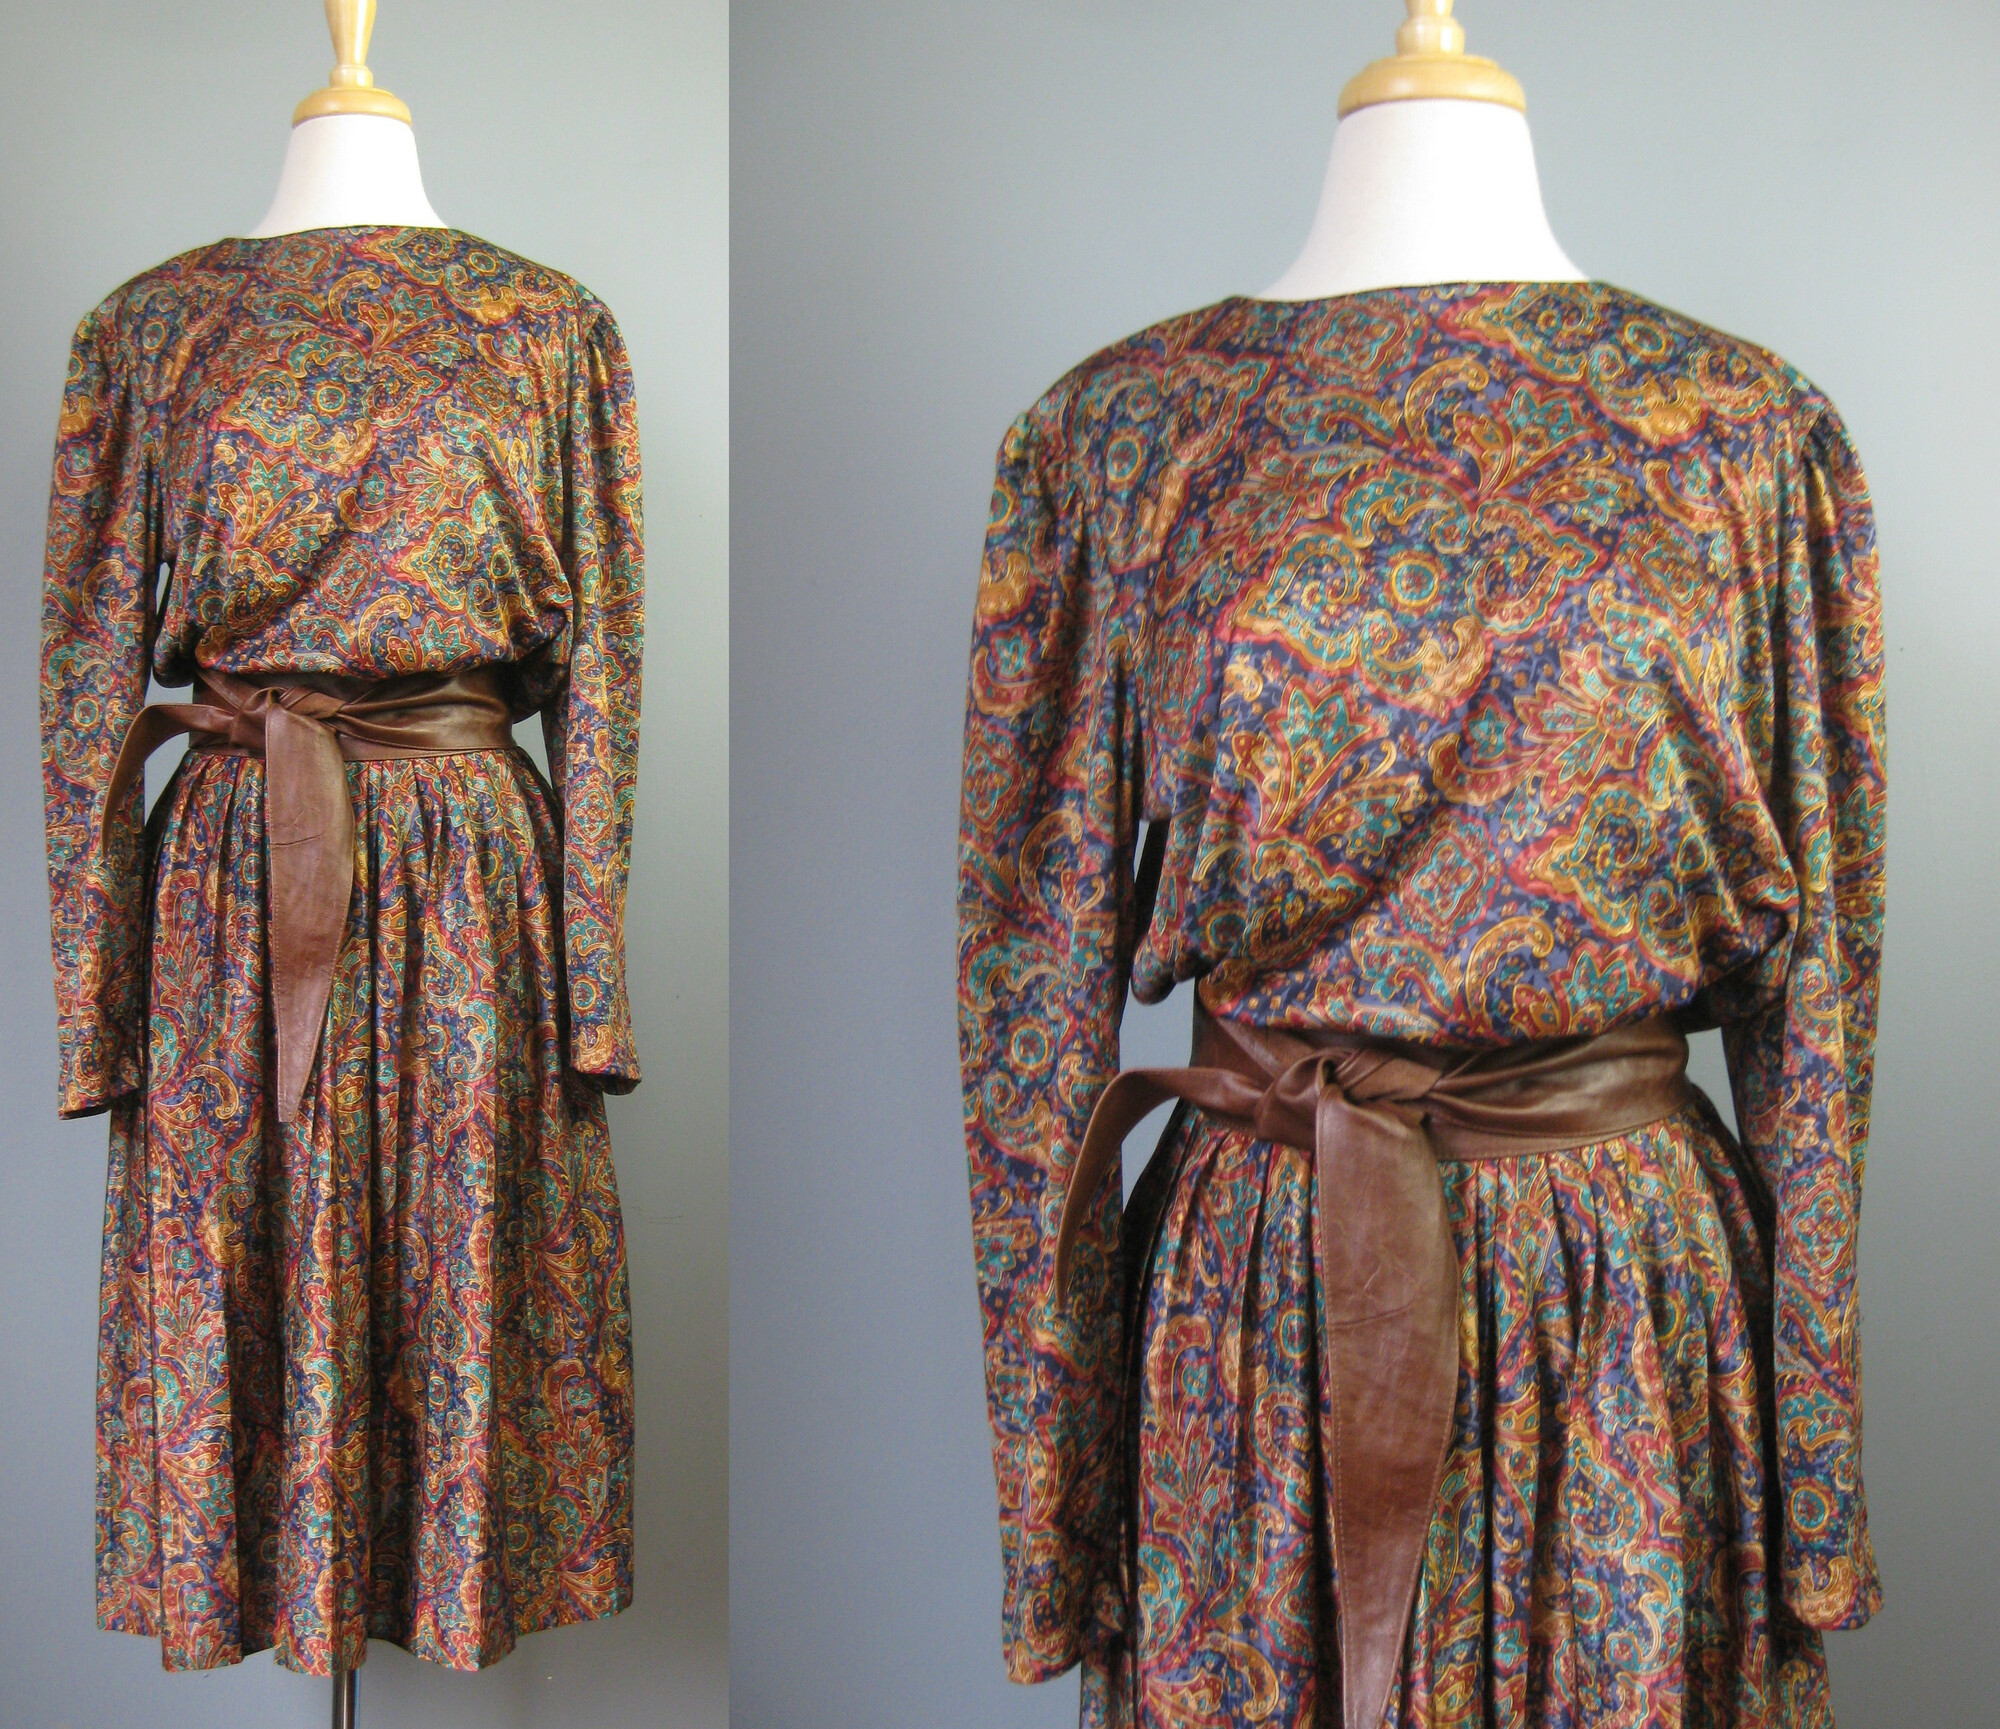 Vtg Bedford Fair Secretar, Jewel, Size: Large
Here is a pretty paisley secretary dress from the 1970s.  It's made of a silky fluid polyester and it is by Bedford Fair.  You pull it on over the head.  It has one button at the back of the neck and an elastic waist.
The colors are teal gold burgundy and purple but it gives off a warm tone brown vibe.  I've paired it with a gorgeous brown leather obi belt that is NOT INCLUDED but available separately.  I think they look great together
Long sleeve
Unlined
Flat measurements:
Shoulder to shoulder: 18
armpit to armpit: 21.25
Waist: 13 to 21
Hip: free
Length: 45
Underarm sleeve seam: 16.5
perfect condition!

Thanks for looking!
#15936